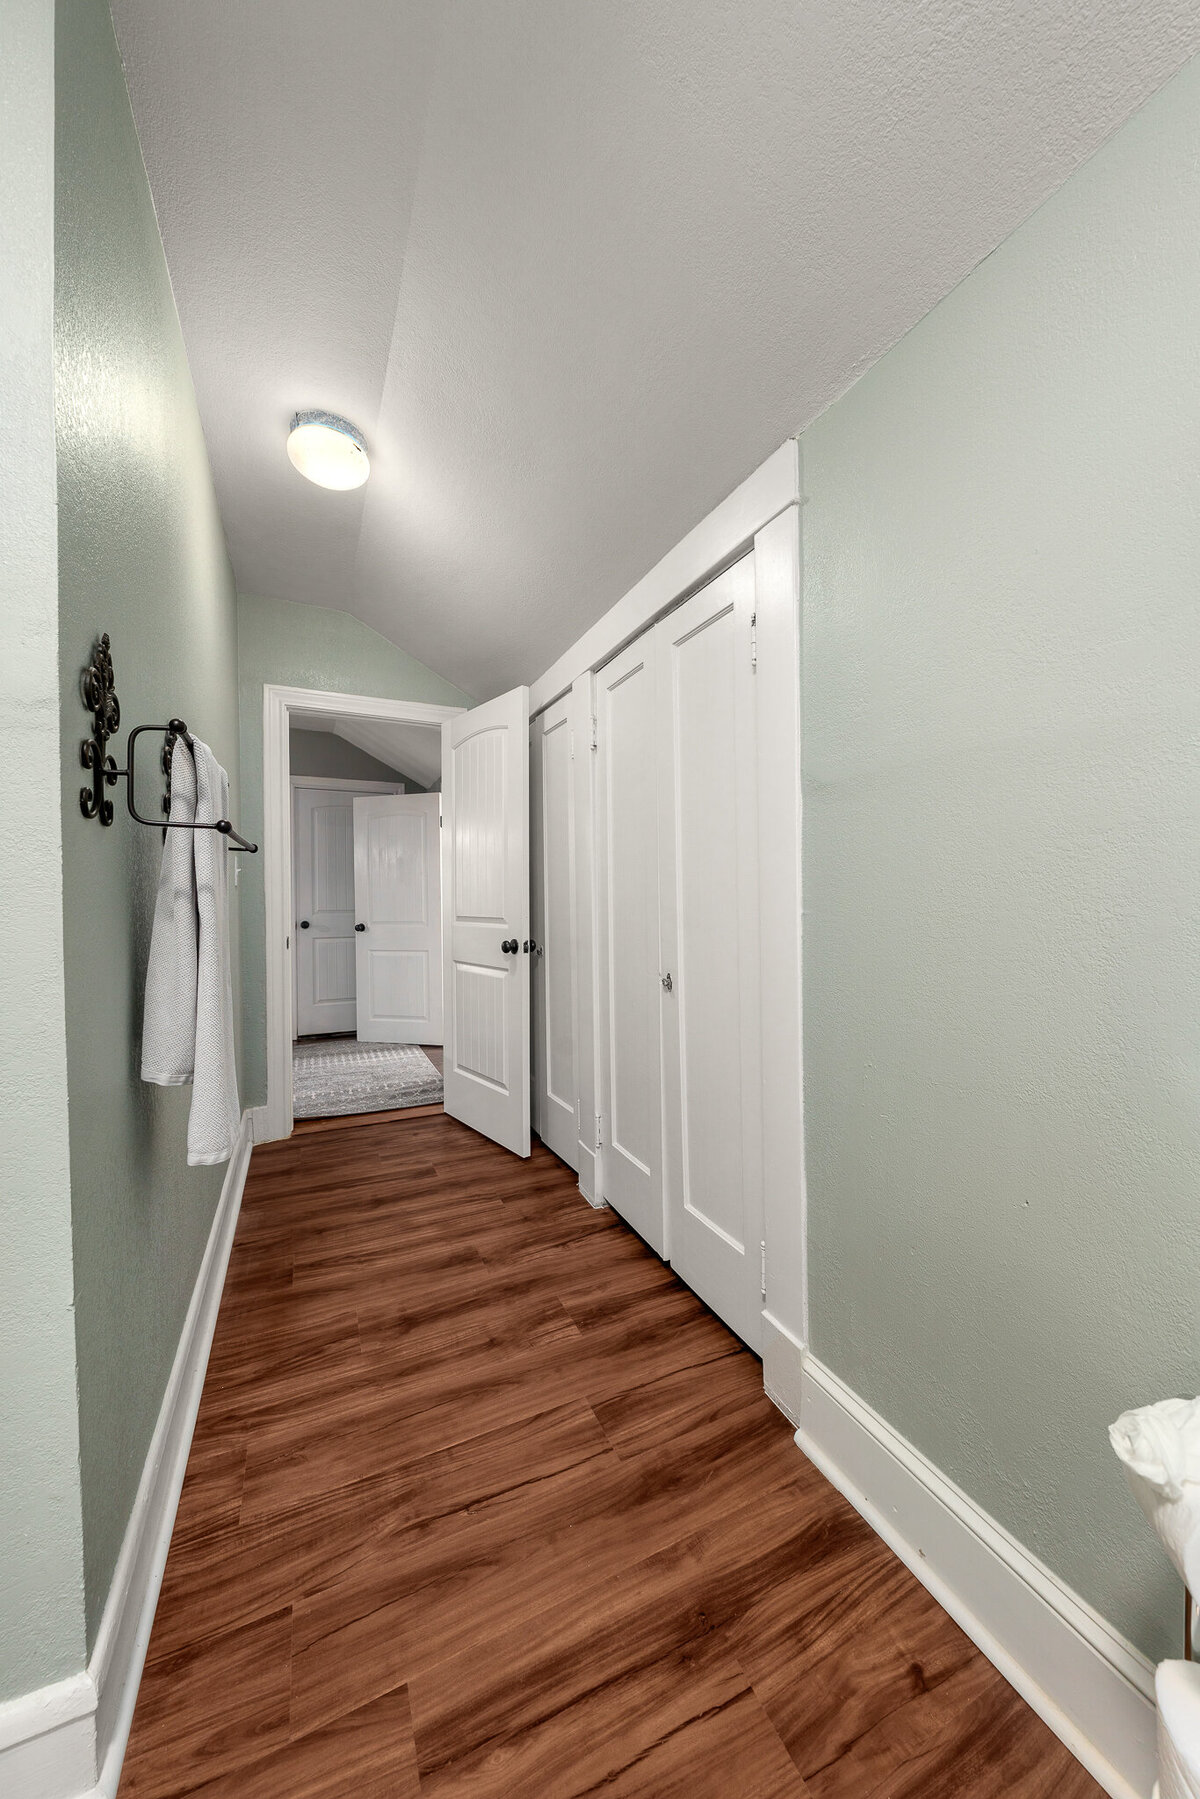 Spacious bathroom with additional storage space in this five-bedroom, 4-bathroom pet-friendly vacation rental house for 12 guests with free wifi, free parking, hot tub, mother-in-law suite, King beds and updated kitchen in downtown Waco, TX.